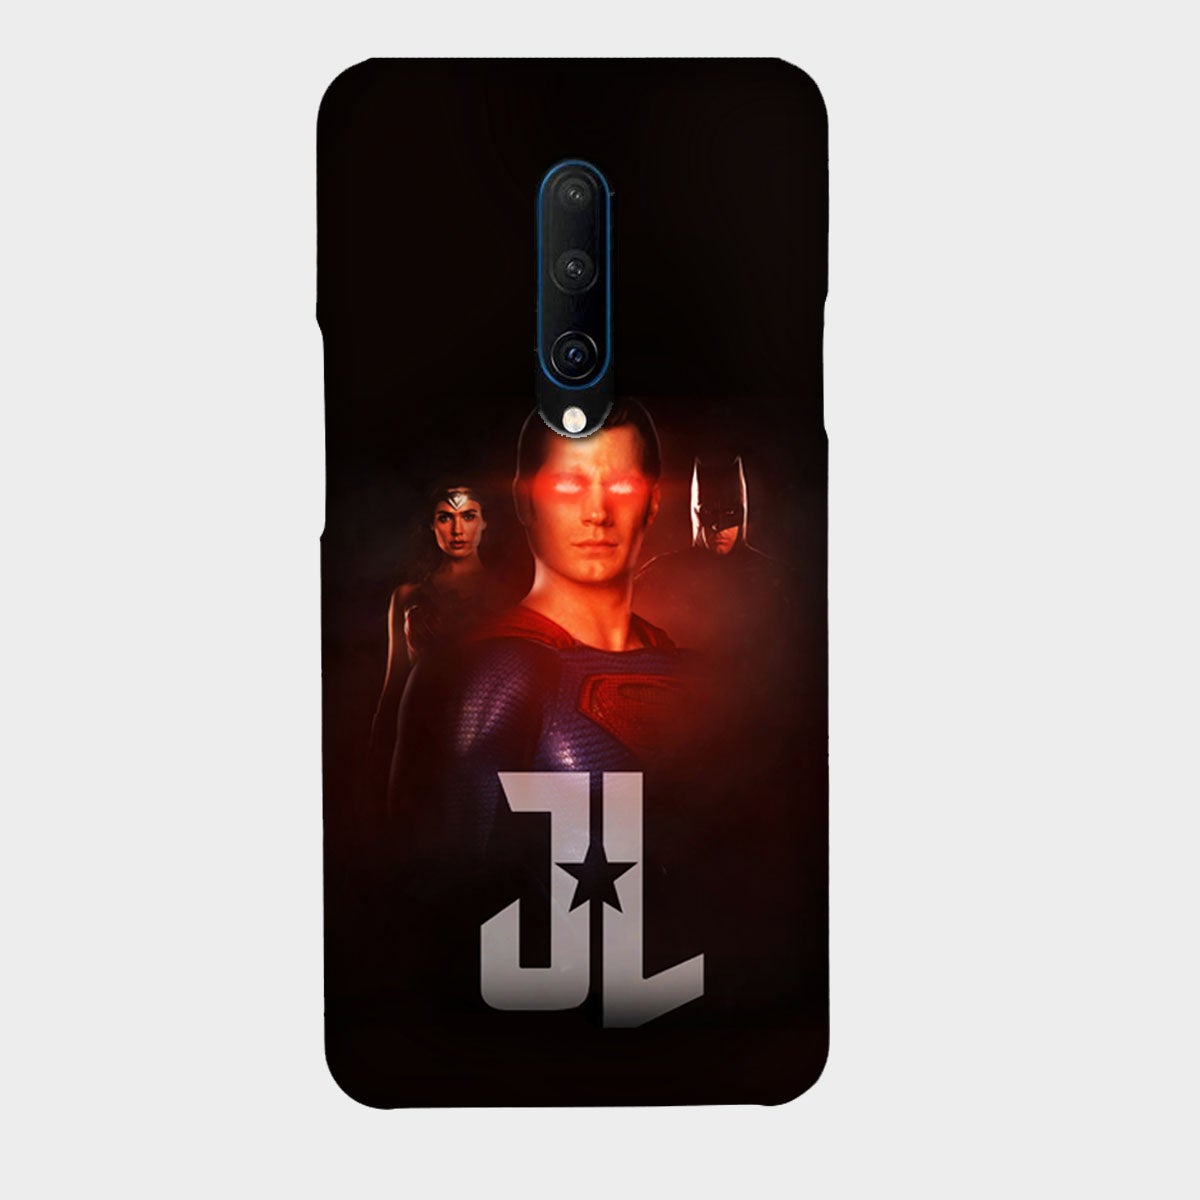 Justic League - DC - Mobile Phone Cover - Hard Case - OnePlus